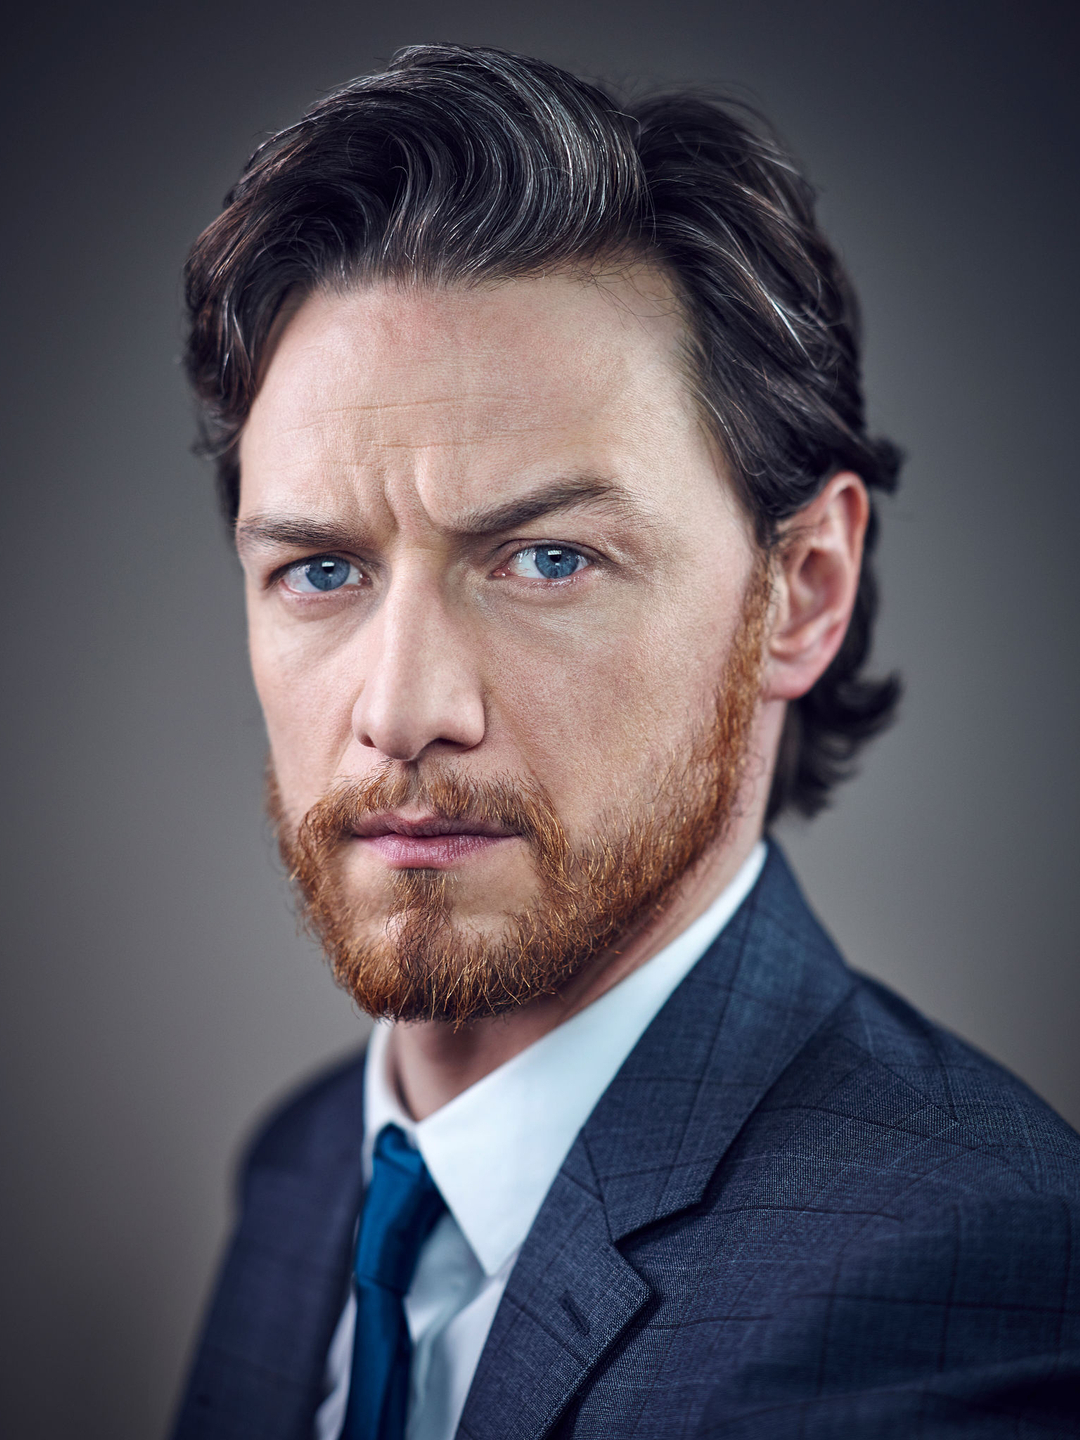 James McAvoy early childhood